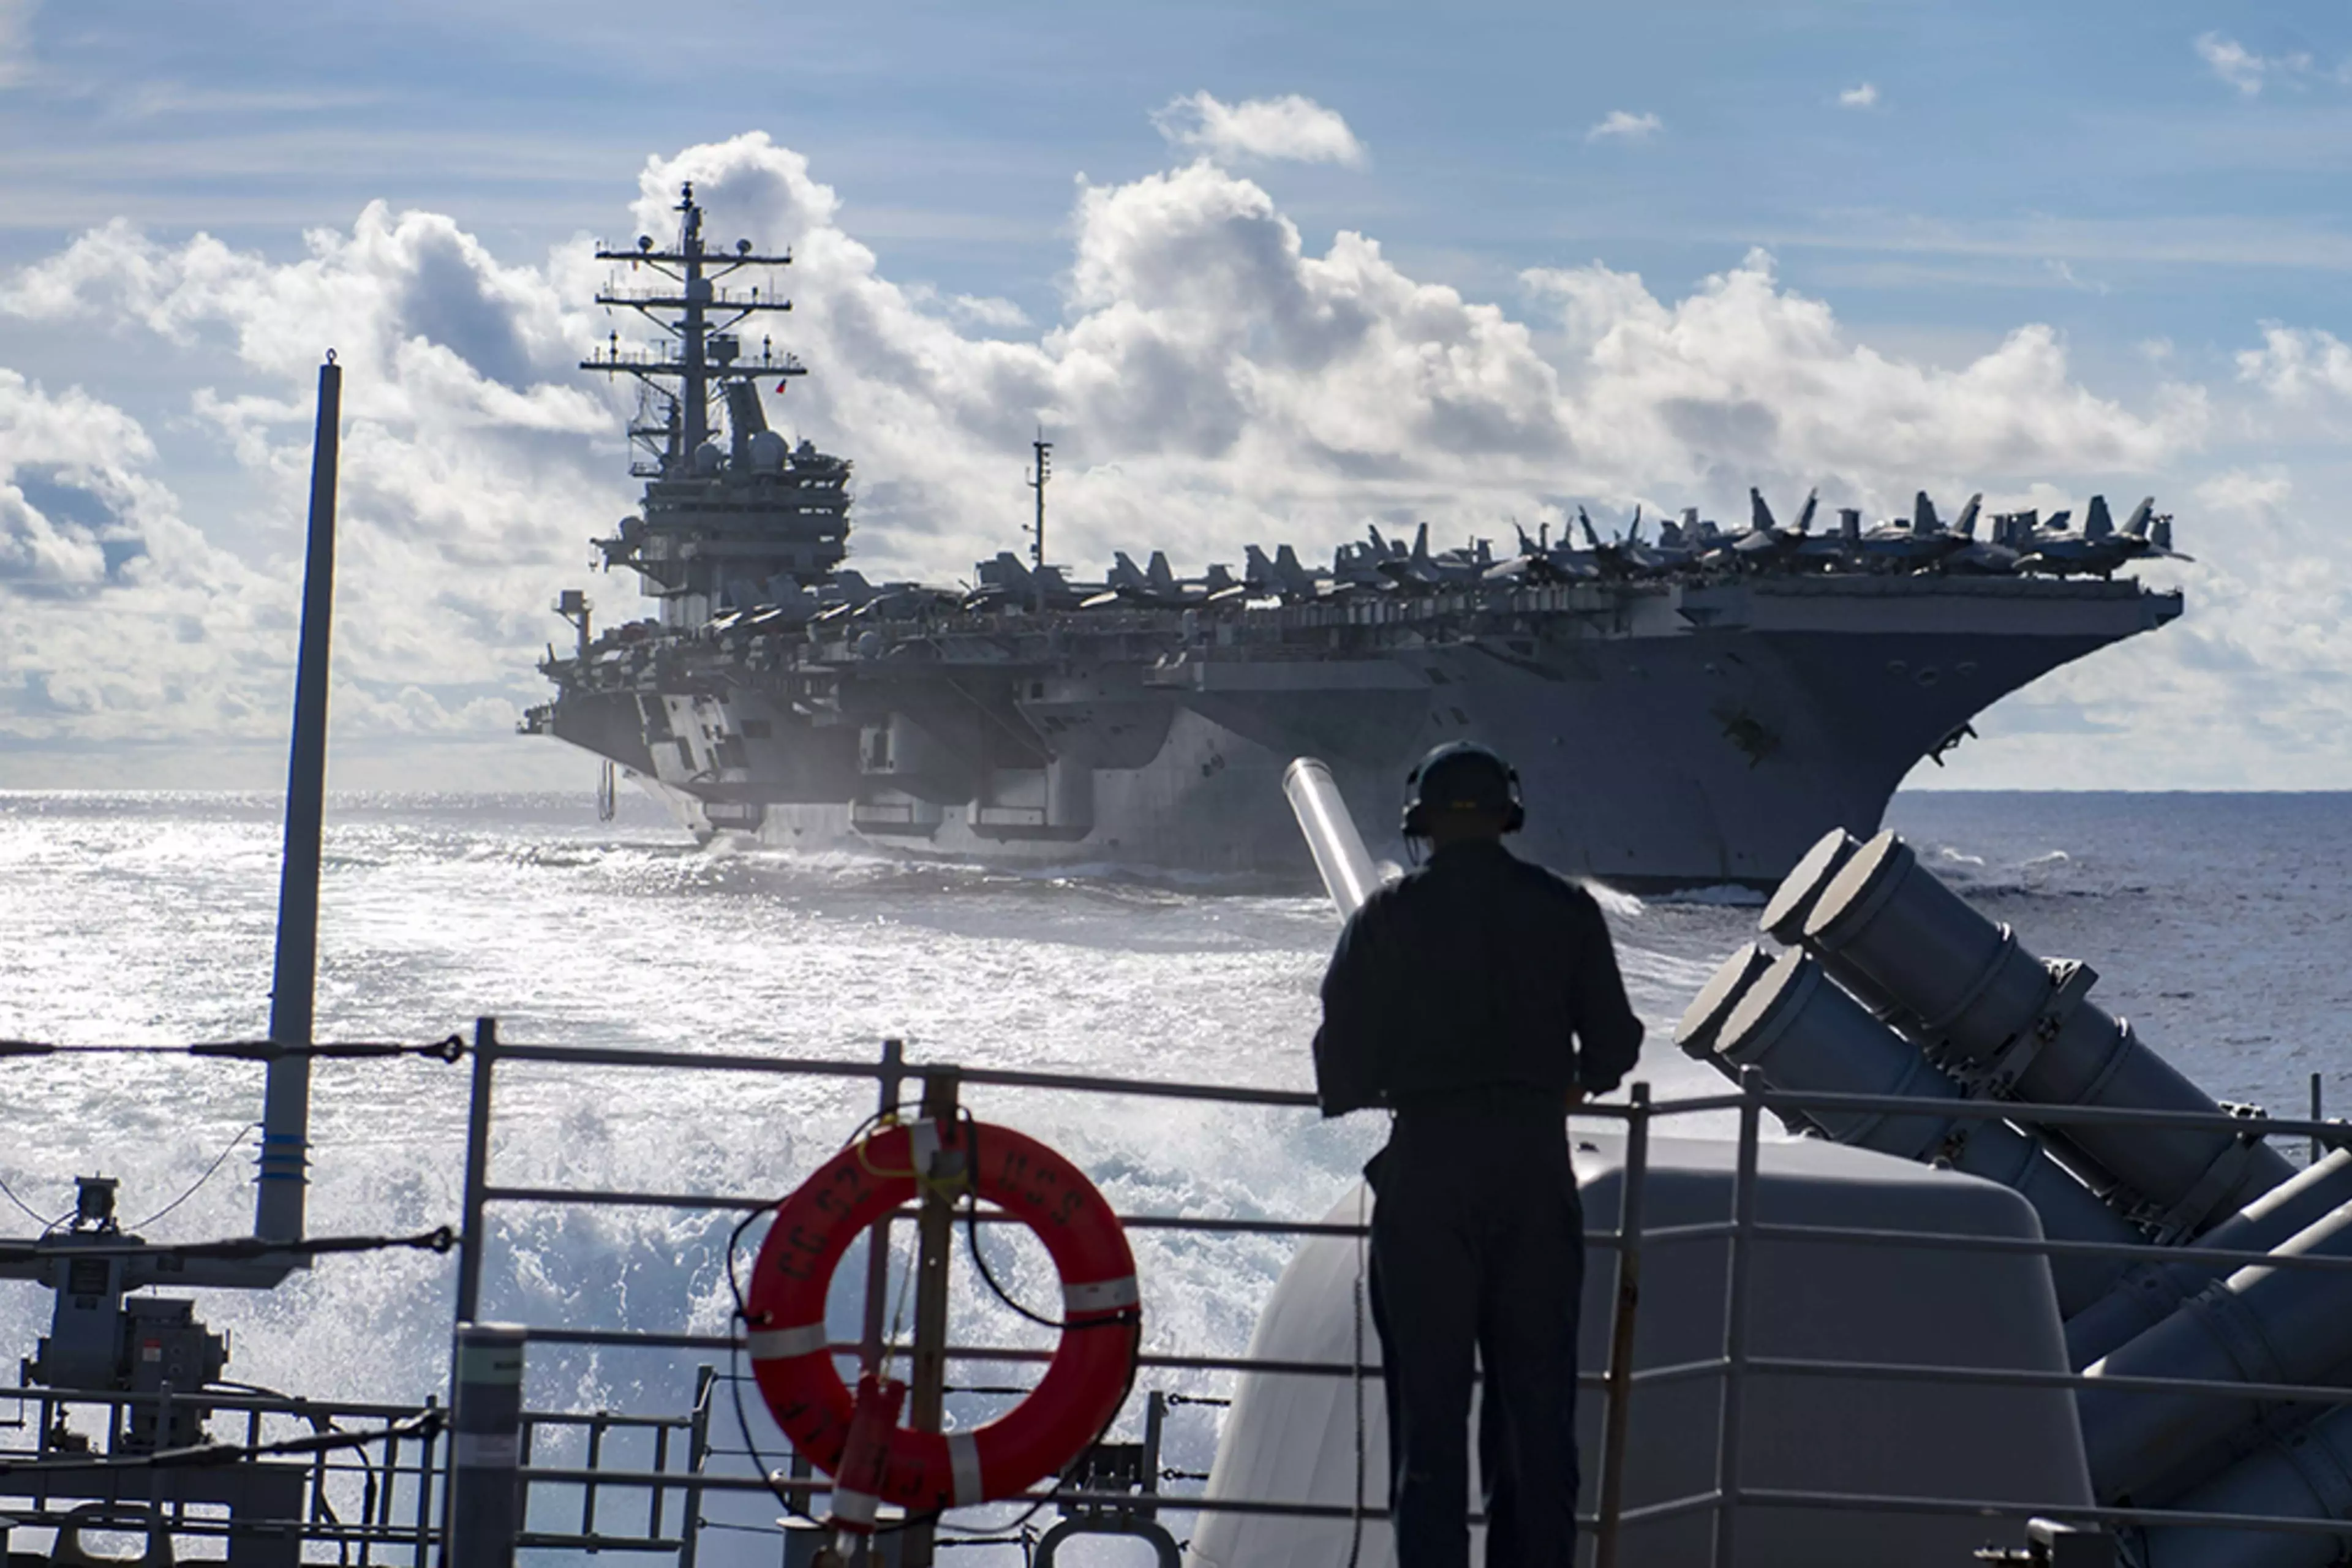 Sea Power: The U.S. Navy and Foreign Policy | Council on Foreign Relations